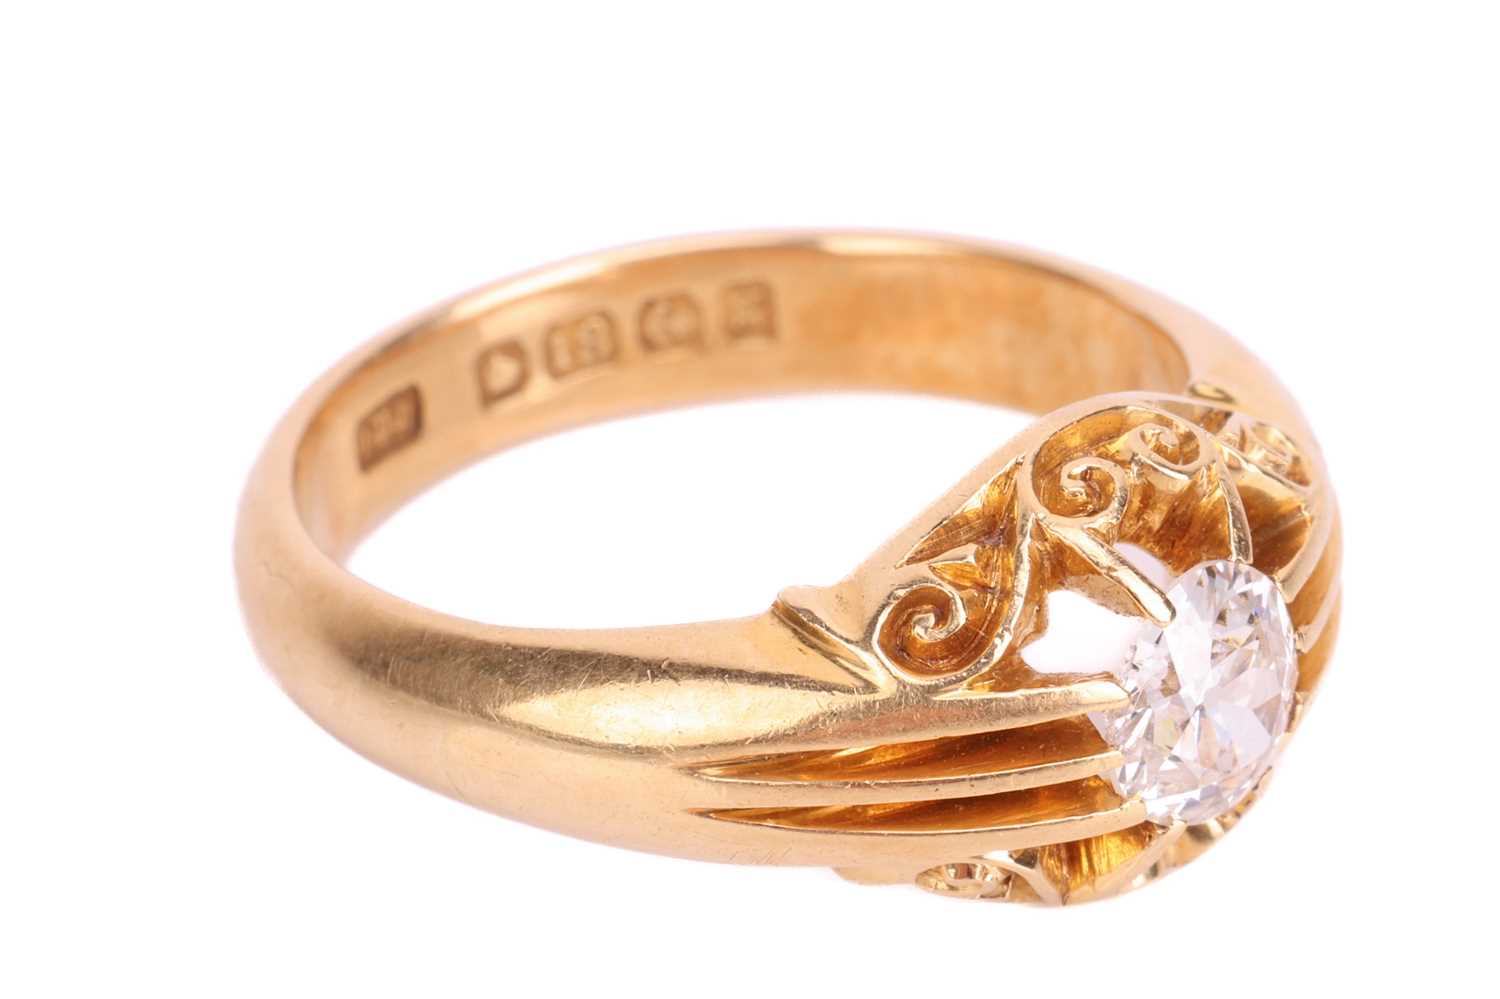 An Edwardian diamond belcher ring in 18ct gold, comprising an old-cut diamond of 5.6 x 5.6 x 2.8 mm, - Image 2 of 4